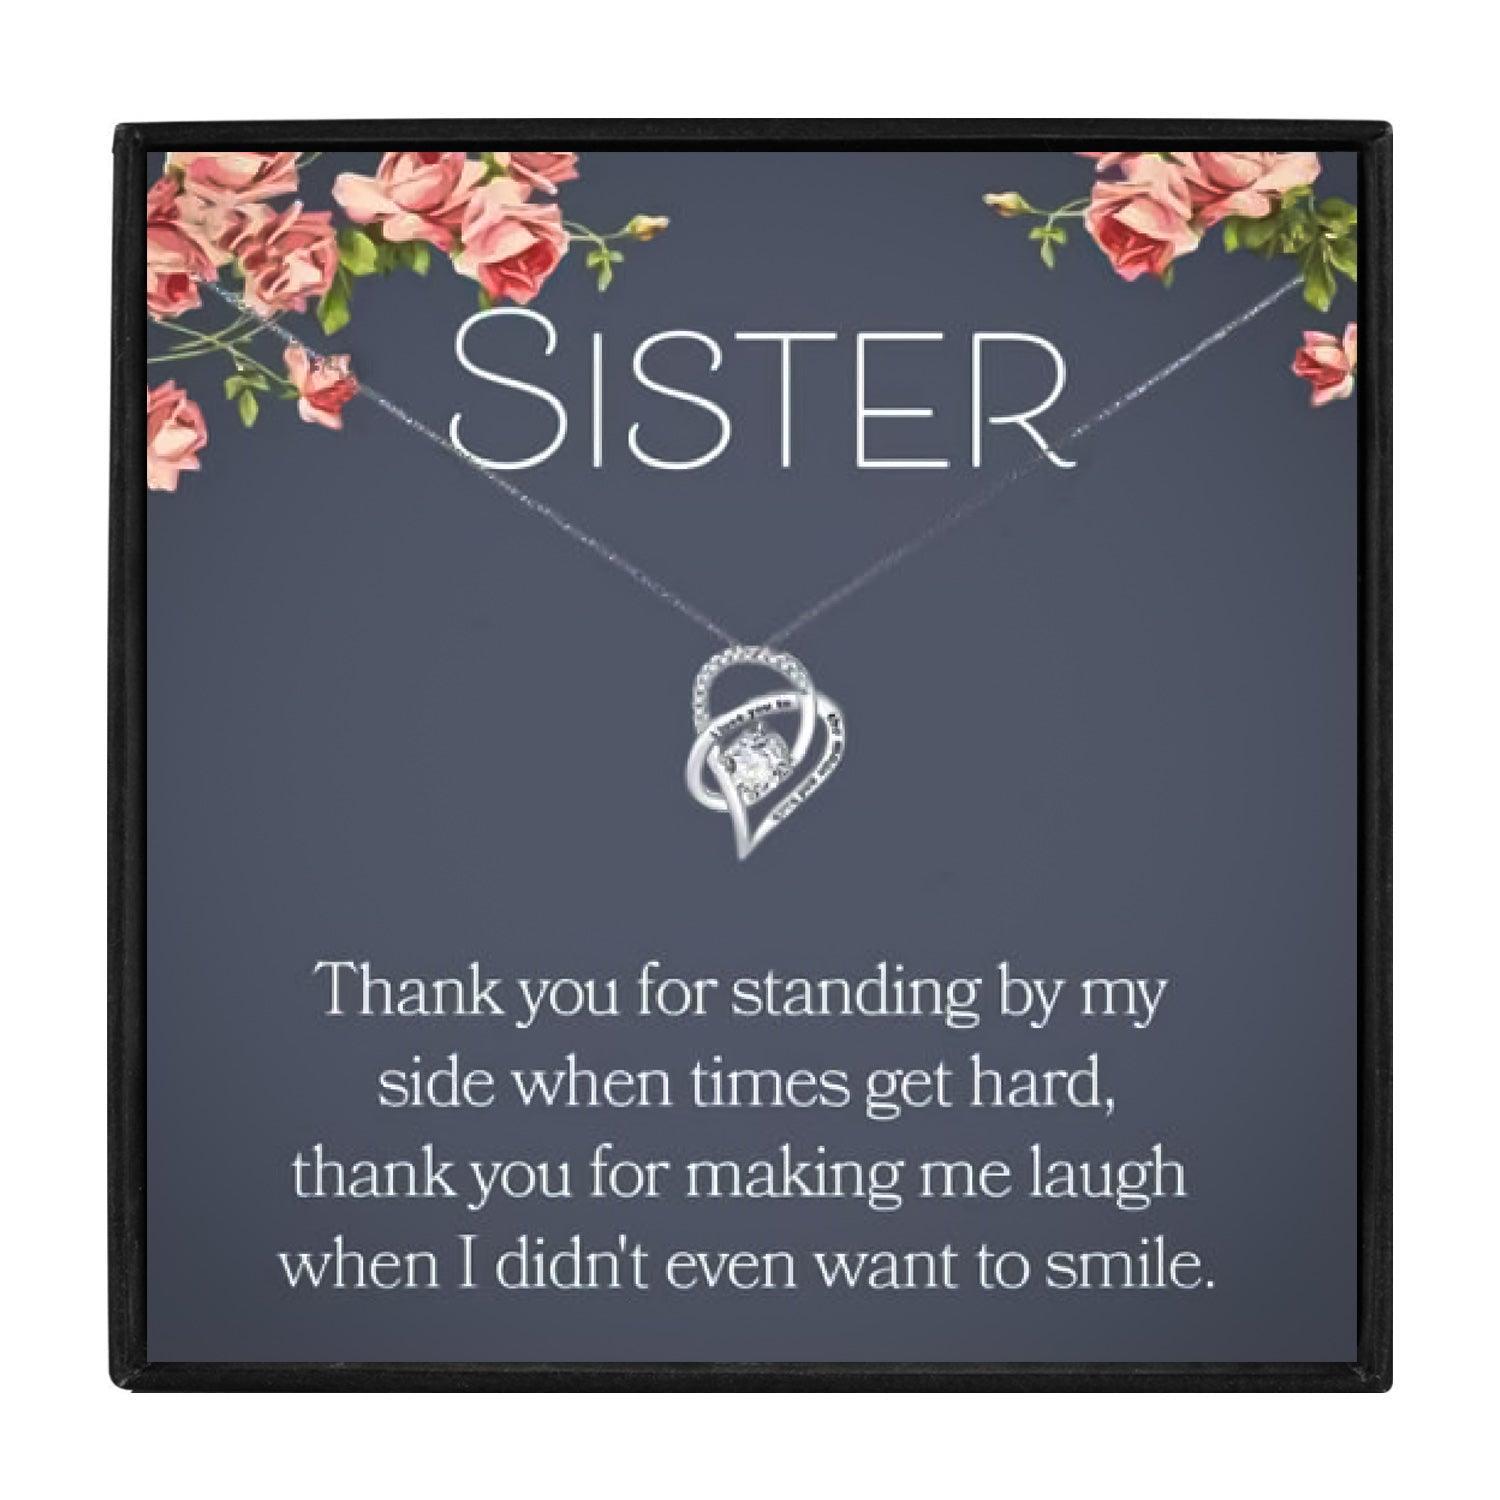 To My Unbiological Sister Gift Necklace Set for Christmas 2023 | To My Unbiological Sister Gift Necklace Set - undefined | Gifts for Sister, Necklace For Women, Necklace Gifts for Sister, unbiological sister necklace | From Hunny Life | hunnylife.com